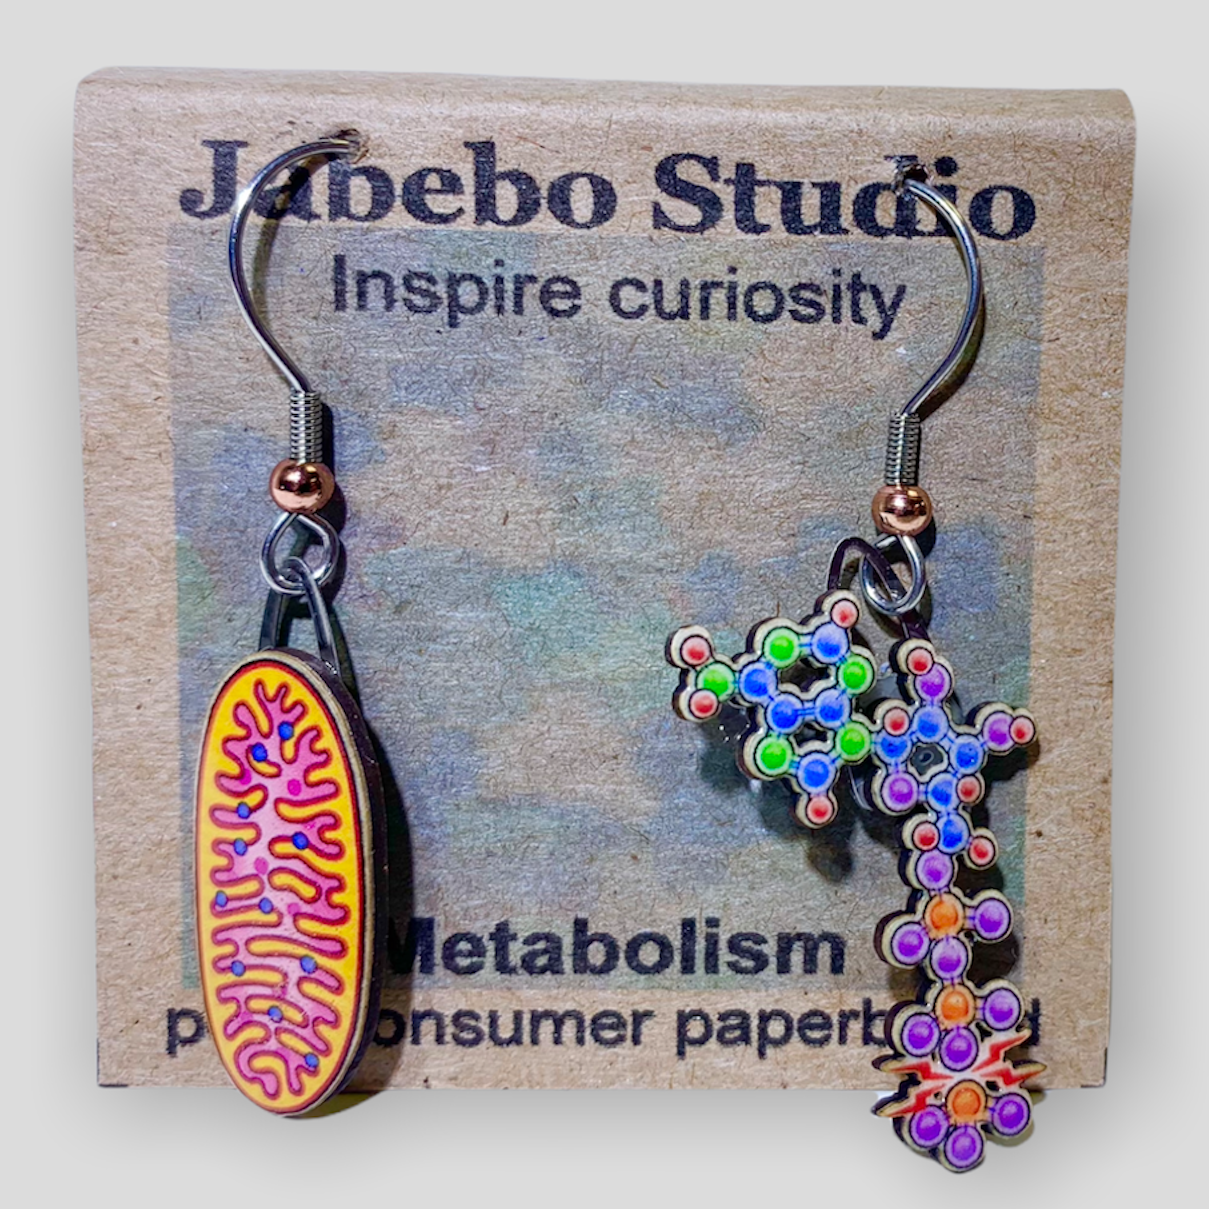 Picture shown is of 1 inch tall pair of earrings of Metabolism.